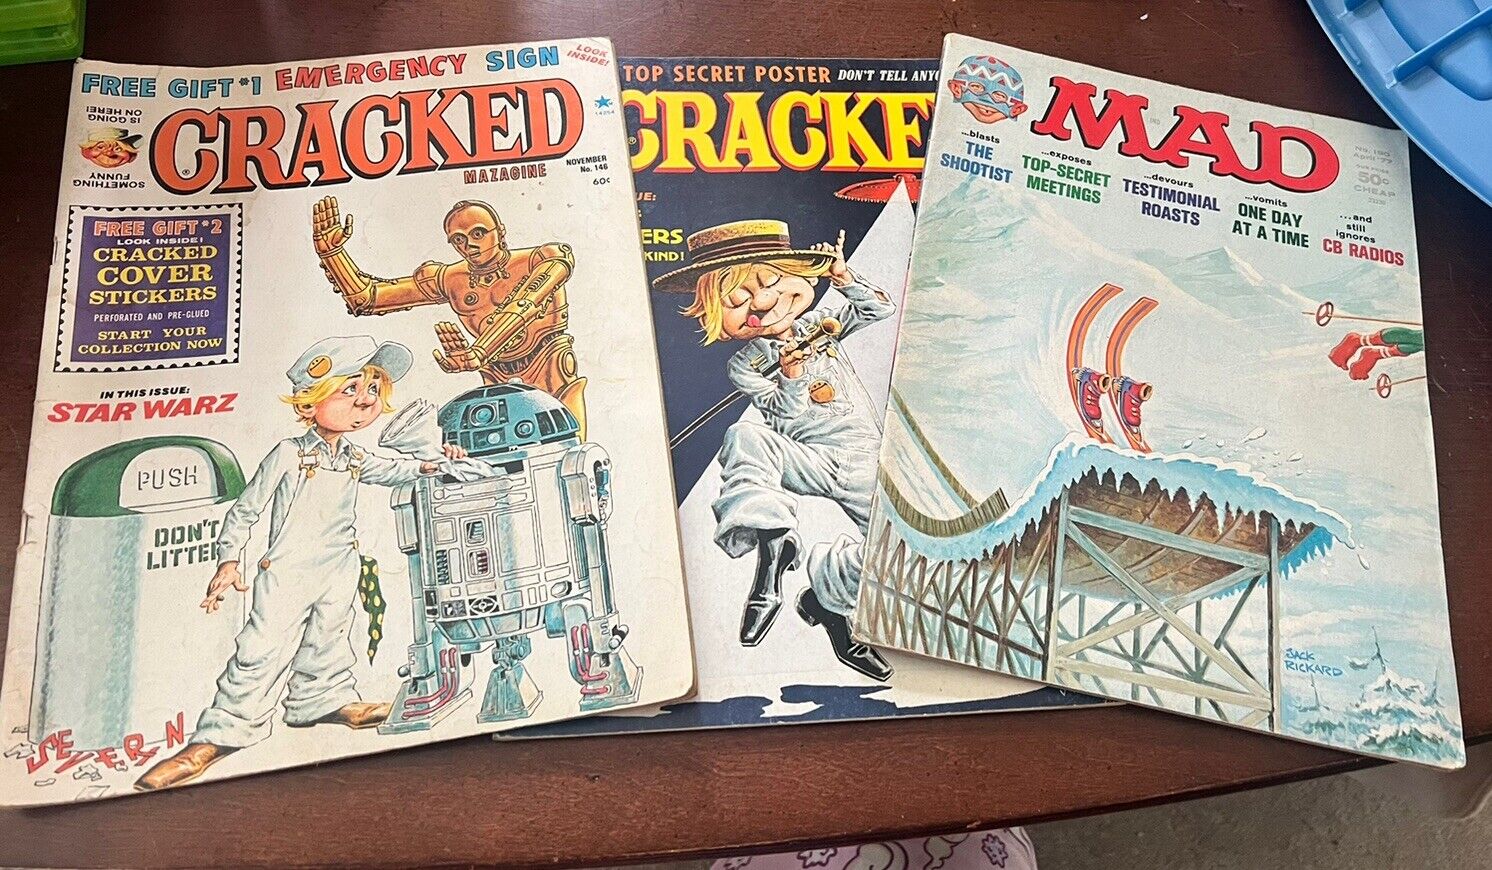 Lot Of 3 MAD & Cracked Magazine Vintage 1970s No Poster Or Stickers Star Wars